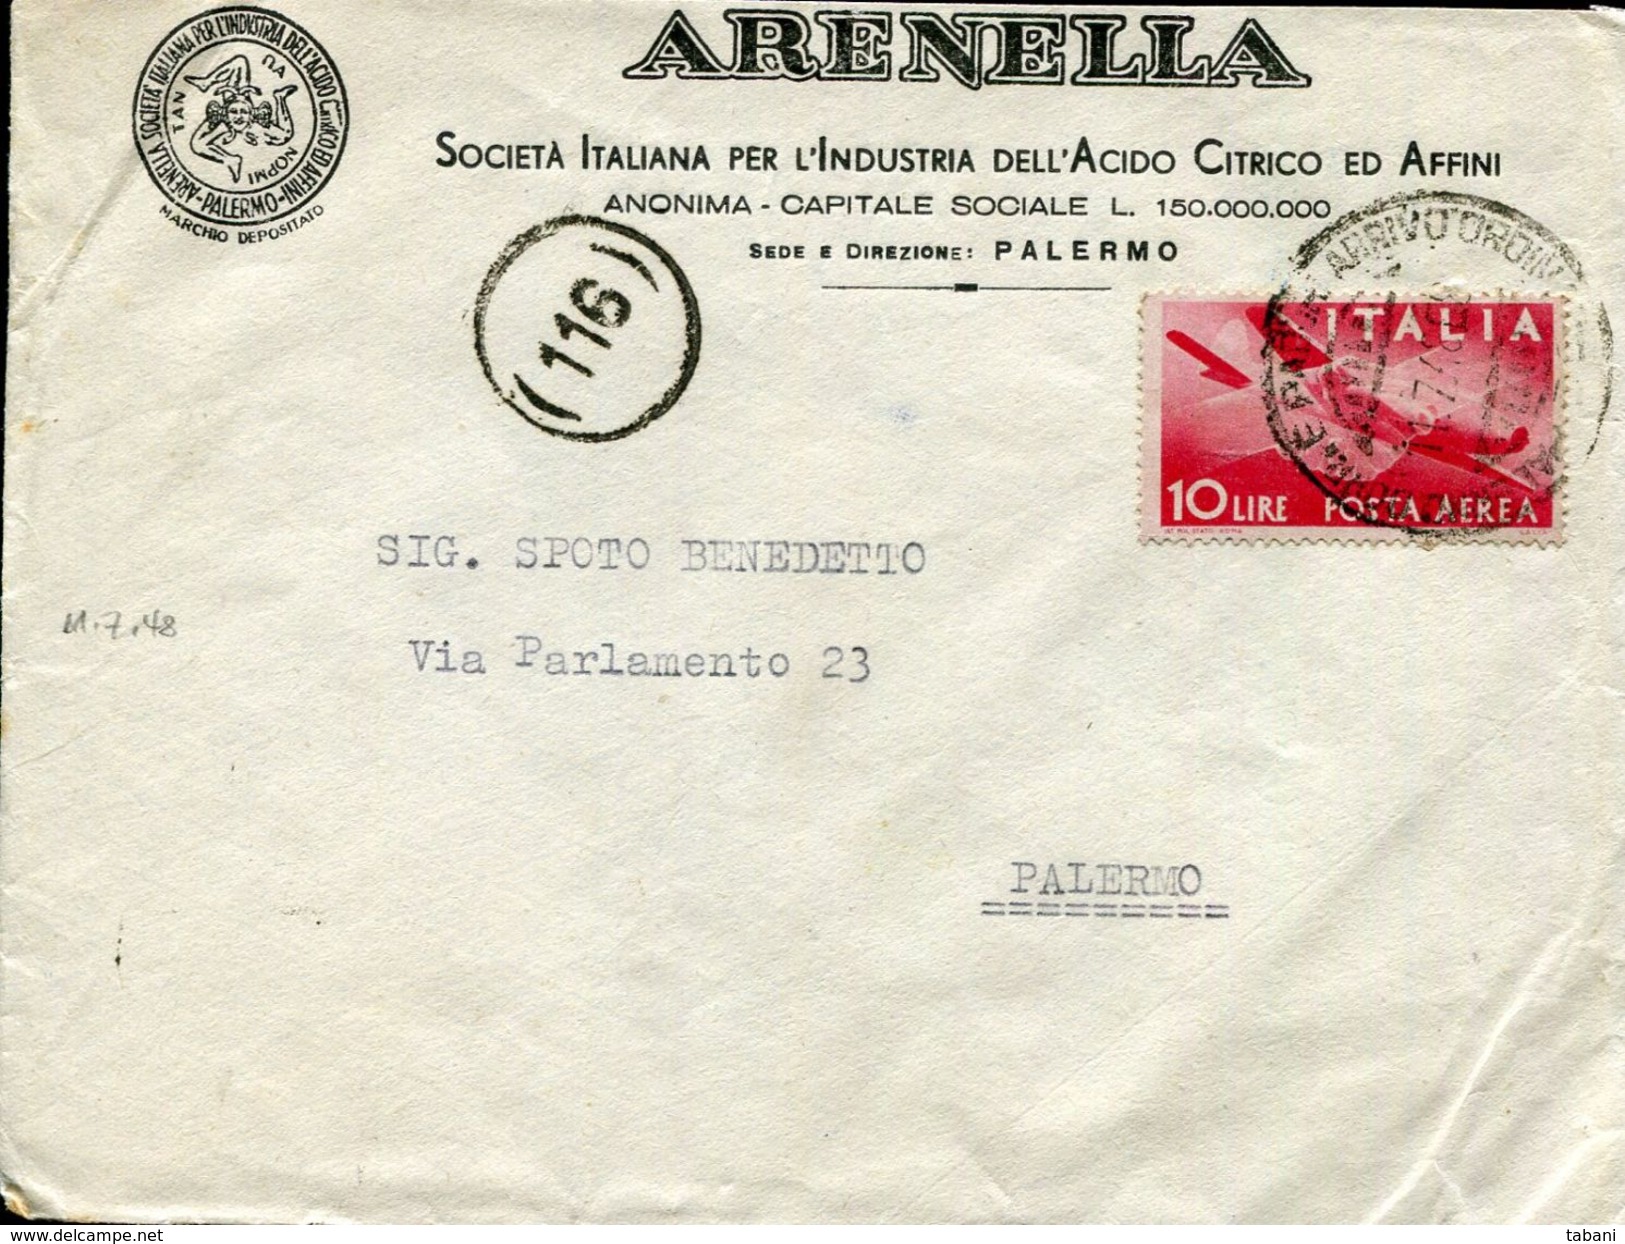 ITALY 1948 PALERMO ARENELLA  SINGLE FRANKING COVER - Local And Autonomous Issues